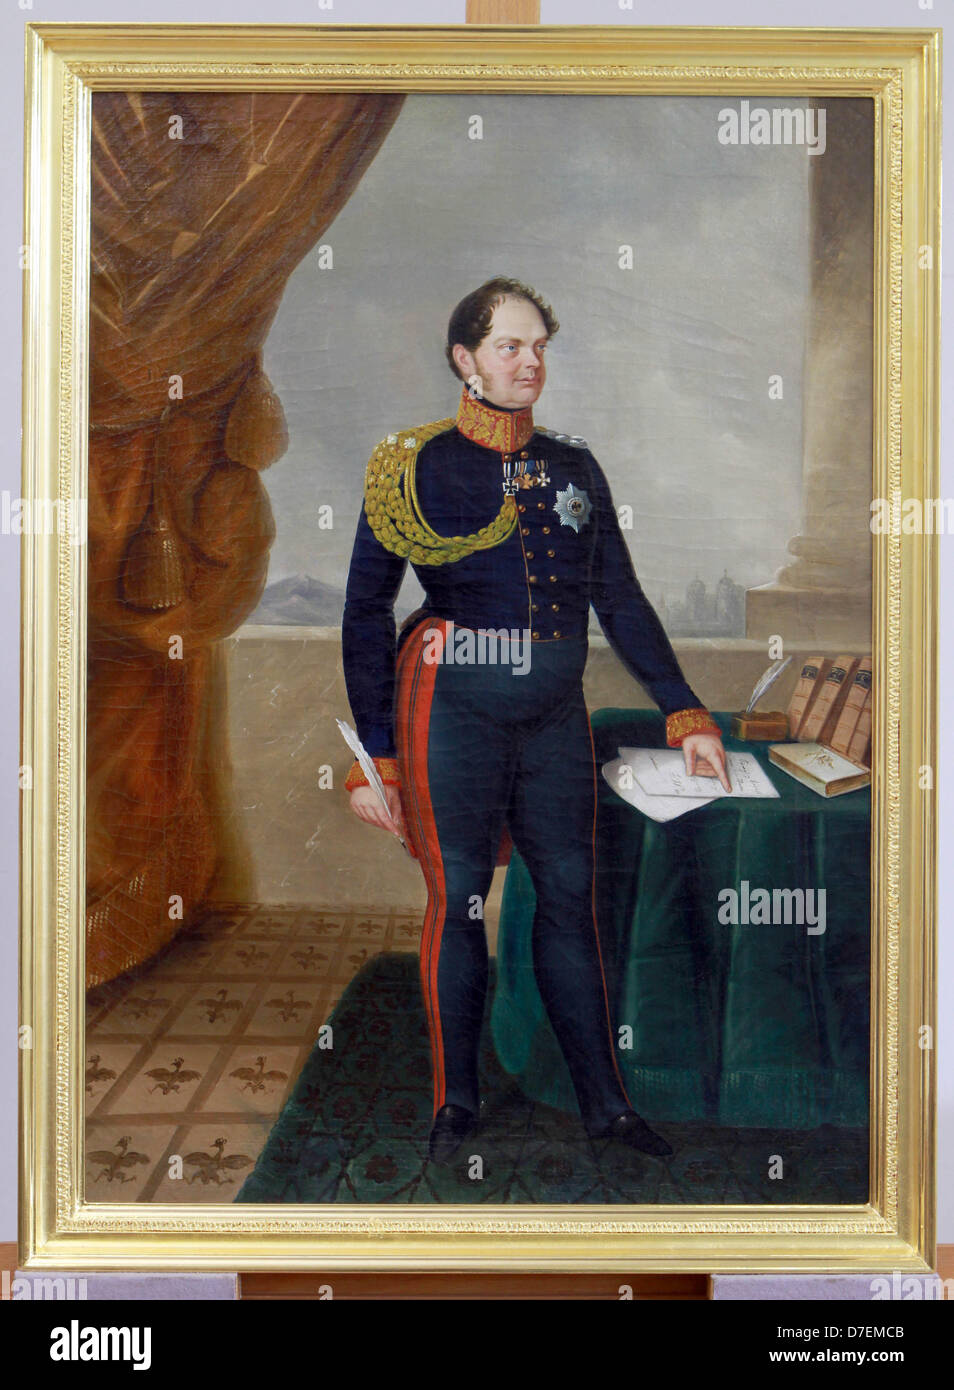 A freshly restaured painting of Frederick William IV of Prussia (1795-1861) is presented at Atelier Wenske & Jehmlich in Potsdam, Germany, 06 May 2013. The painting will join the permanent exhibition at Potsdam Museum after two months of restaurations. Photo: NESTOR BACHMANN Stock Photo